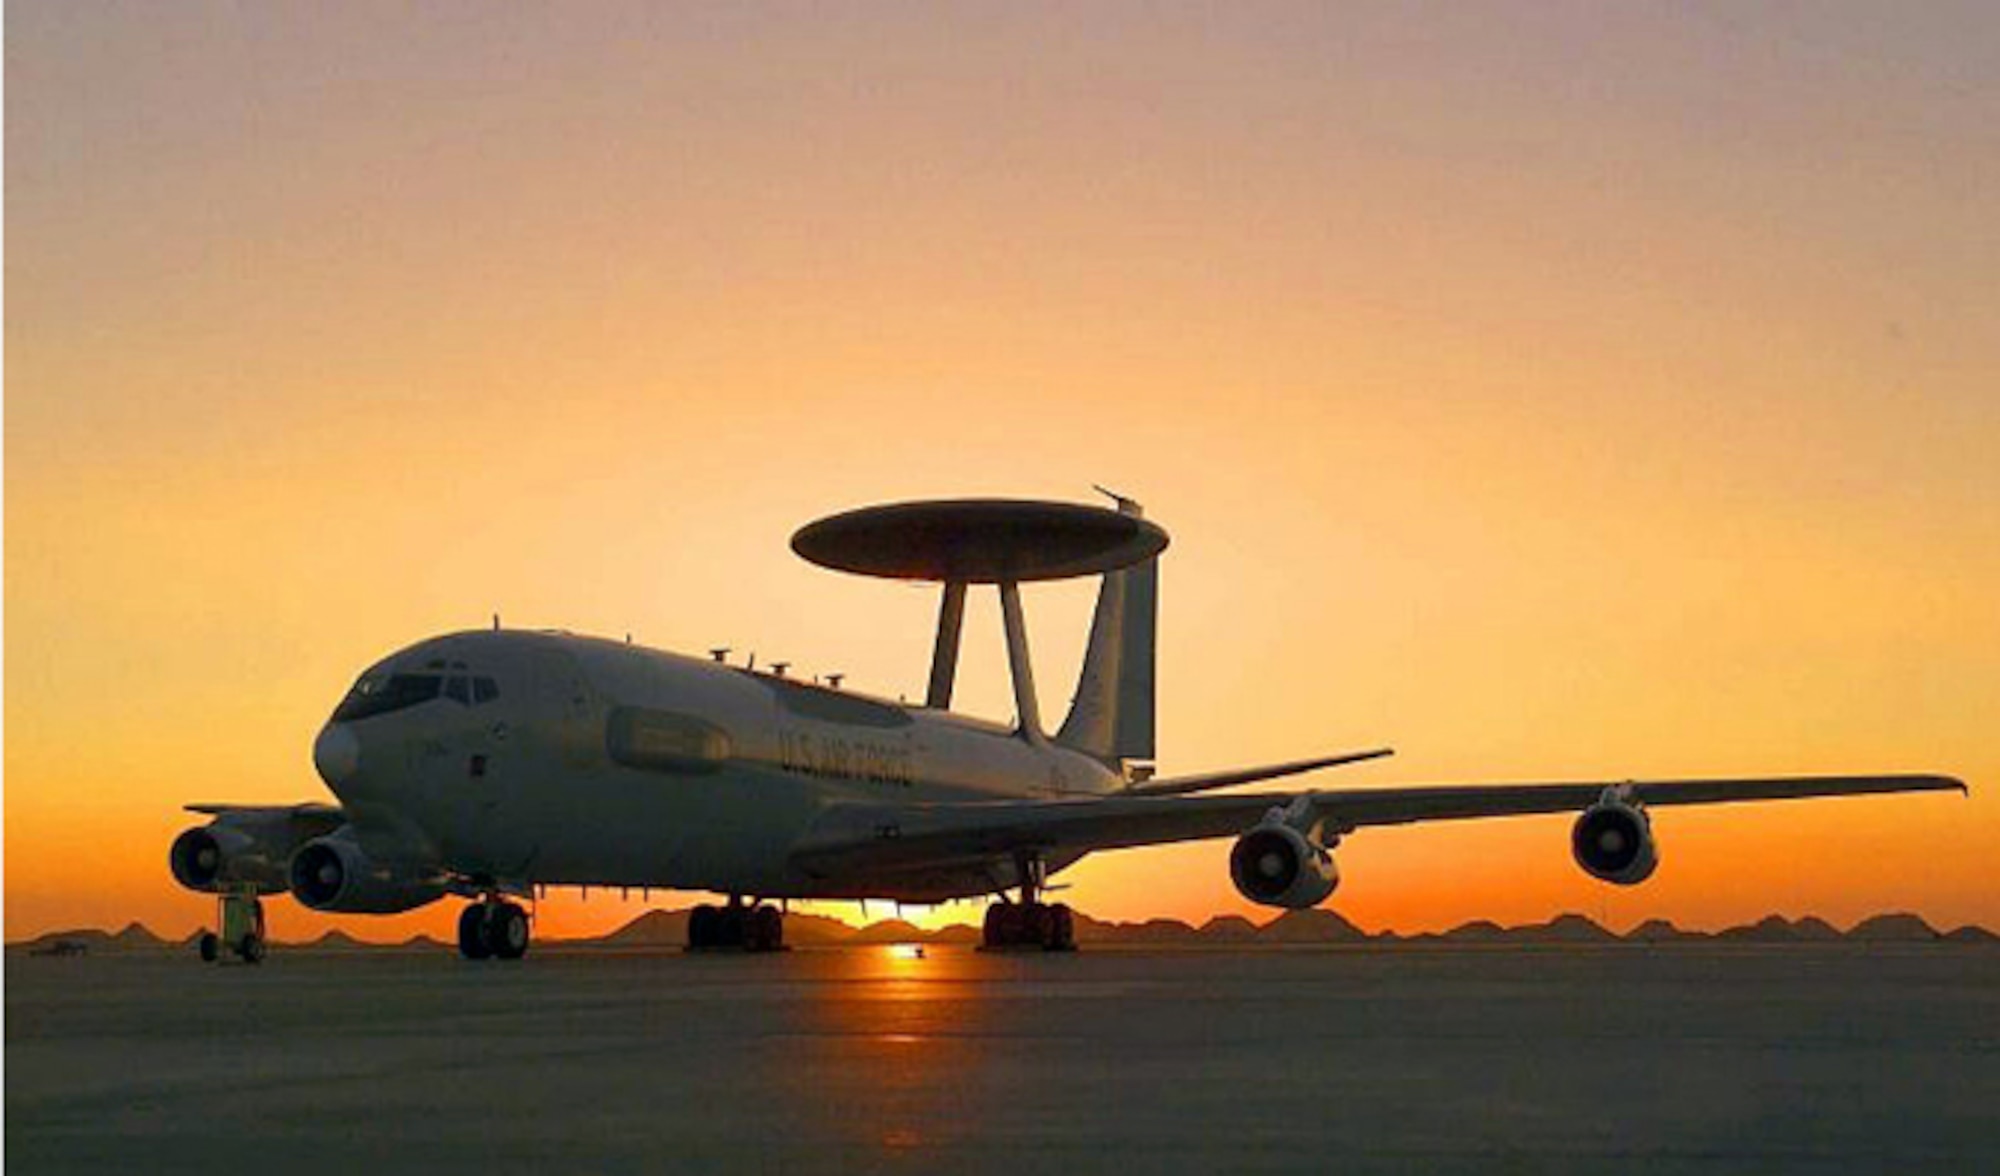 An E-3G Sentry, an Airborne Warning and Control System aircraft, sits on a flightline. In support of air-to-ground operations, Sentry crews can provide direct information needed for interdiction, reconnaissance, airlift and close air support for friendly ground forces. They can also provide information for commanders of air operations to gain and maintain control of the air battle. (Courtesy photo)